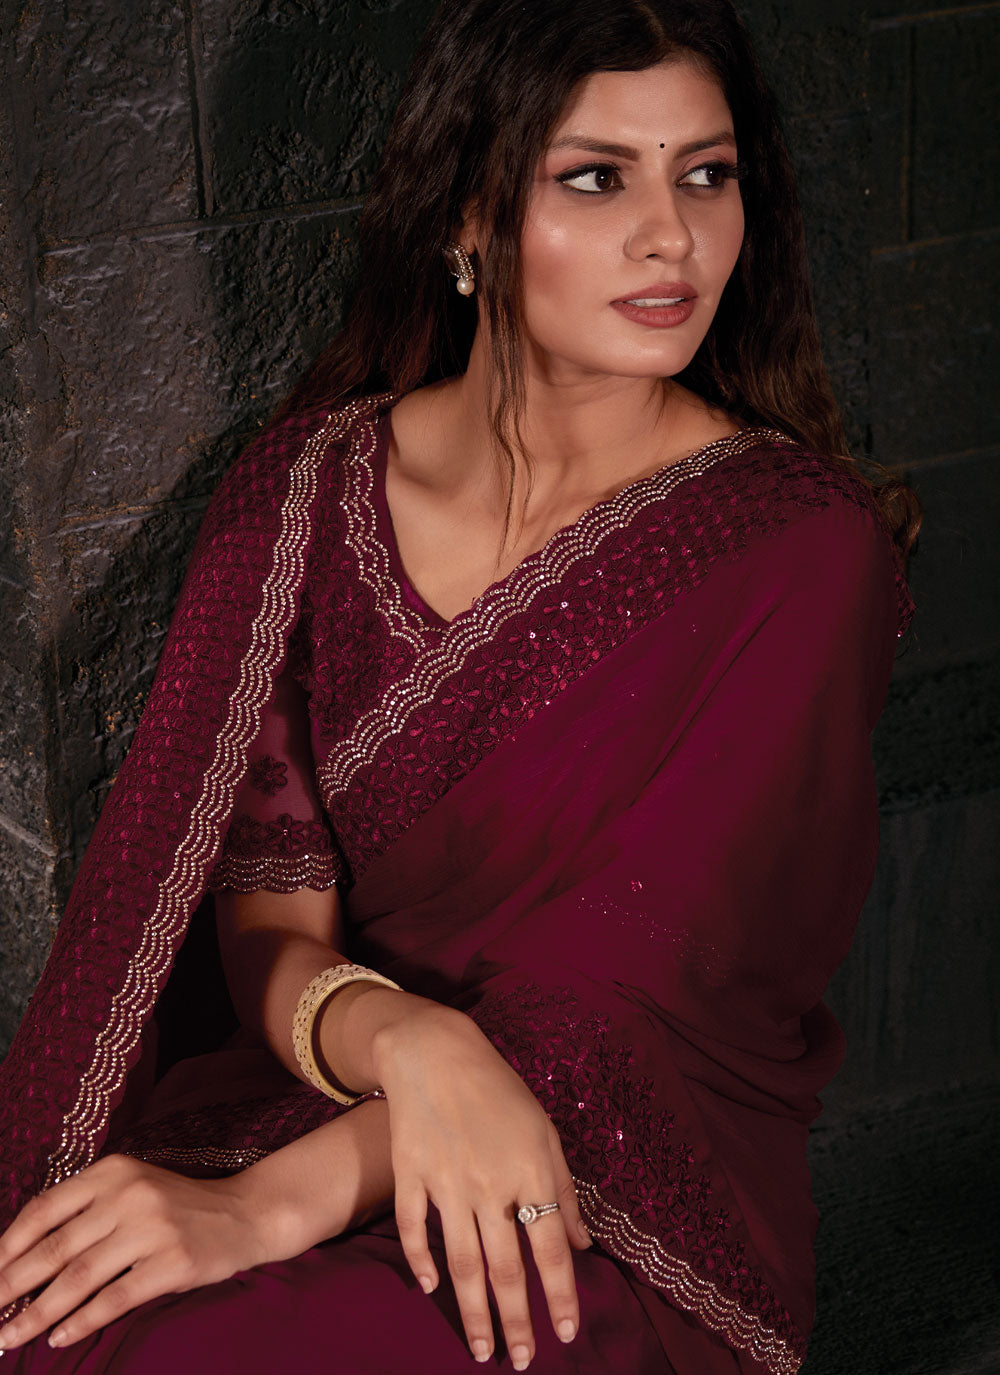 Maroon Chiffon Satin Contemporary Saree With Patch Border, Embroidered And Sequins Work